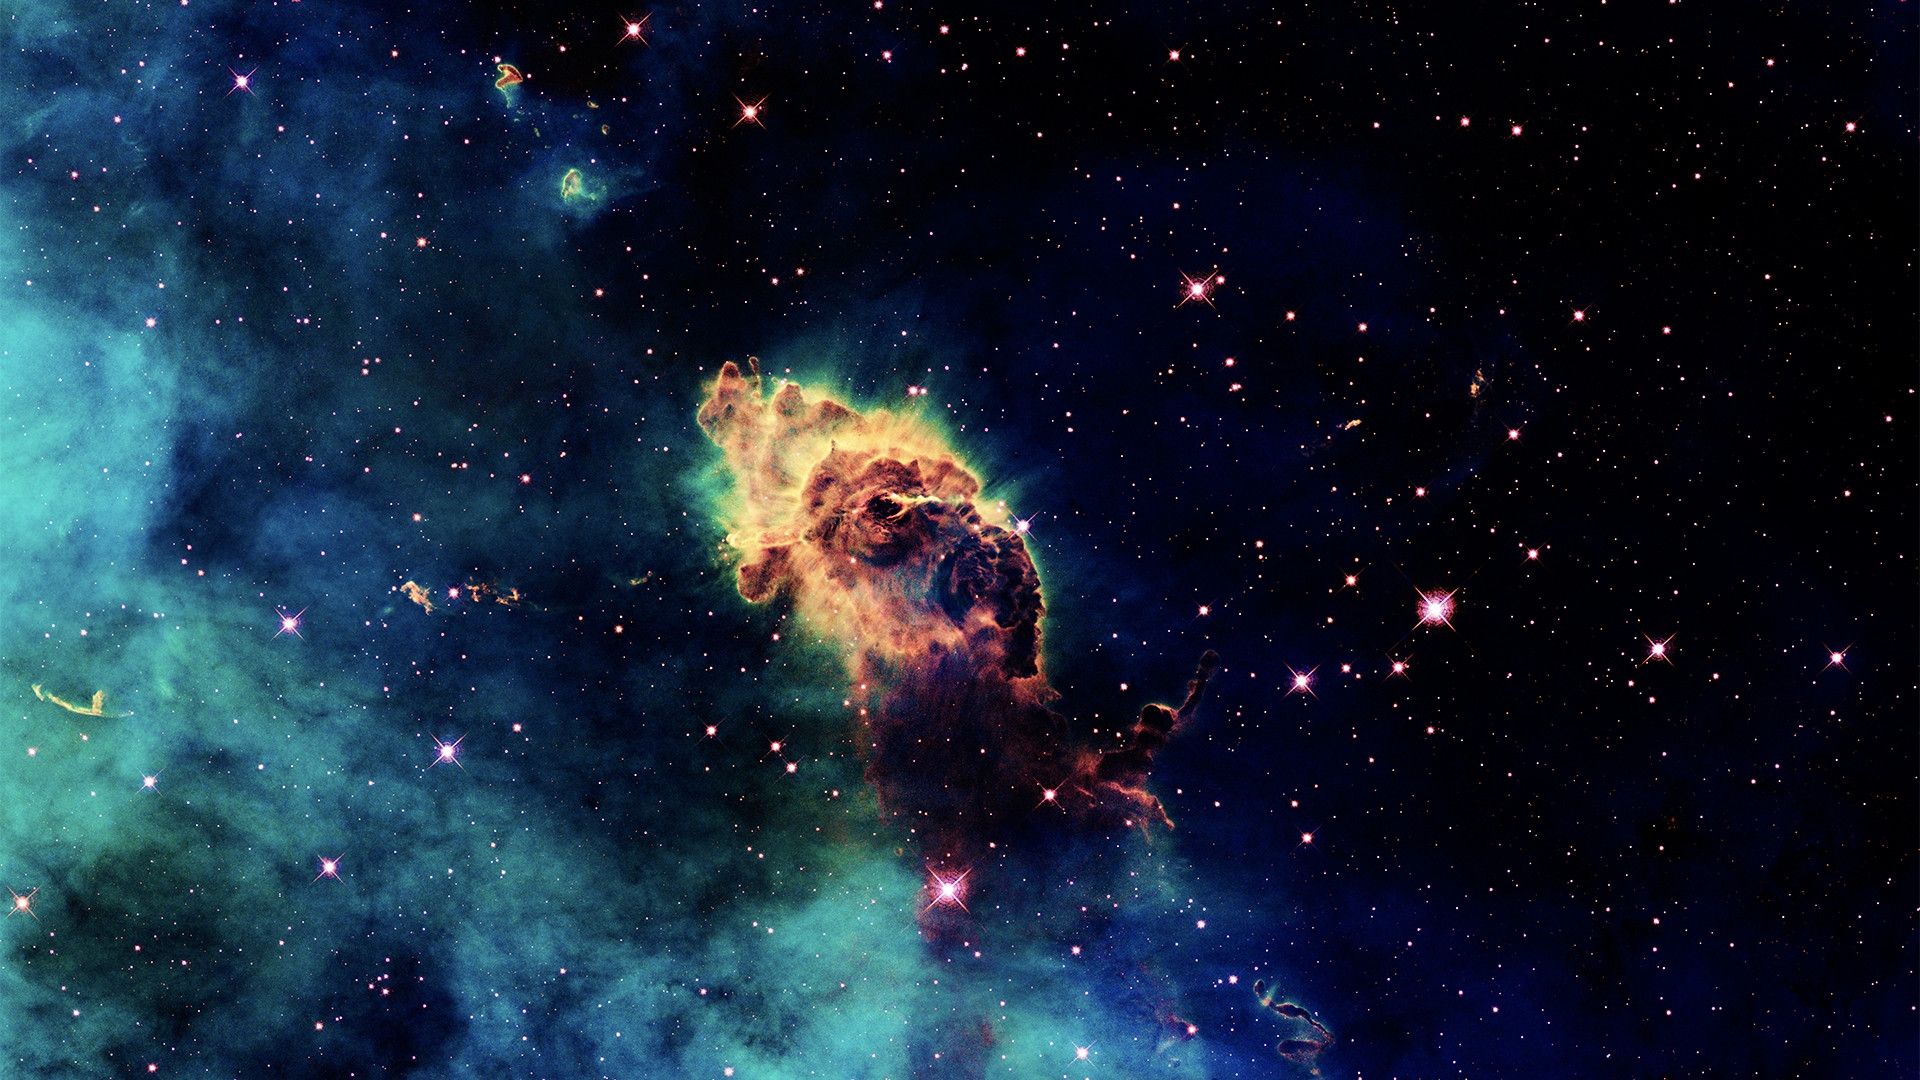 Download Real Space Wallpaper Phone #3zl3b » hdxwallpaperz.com